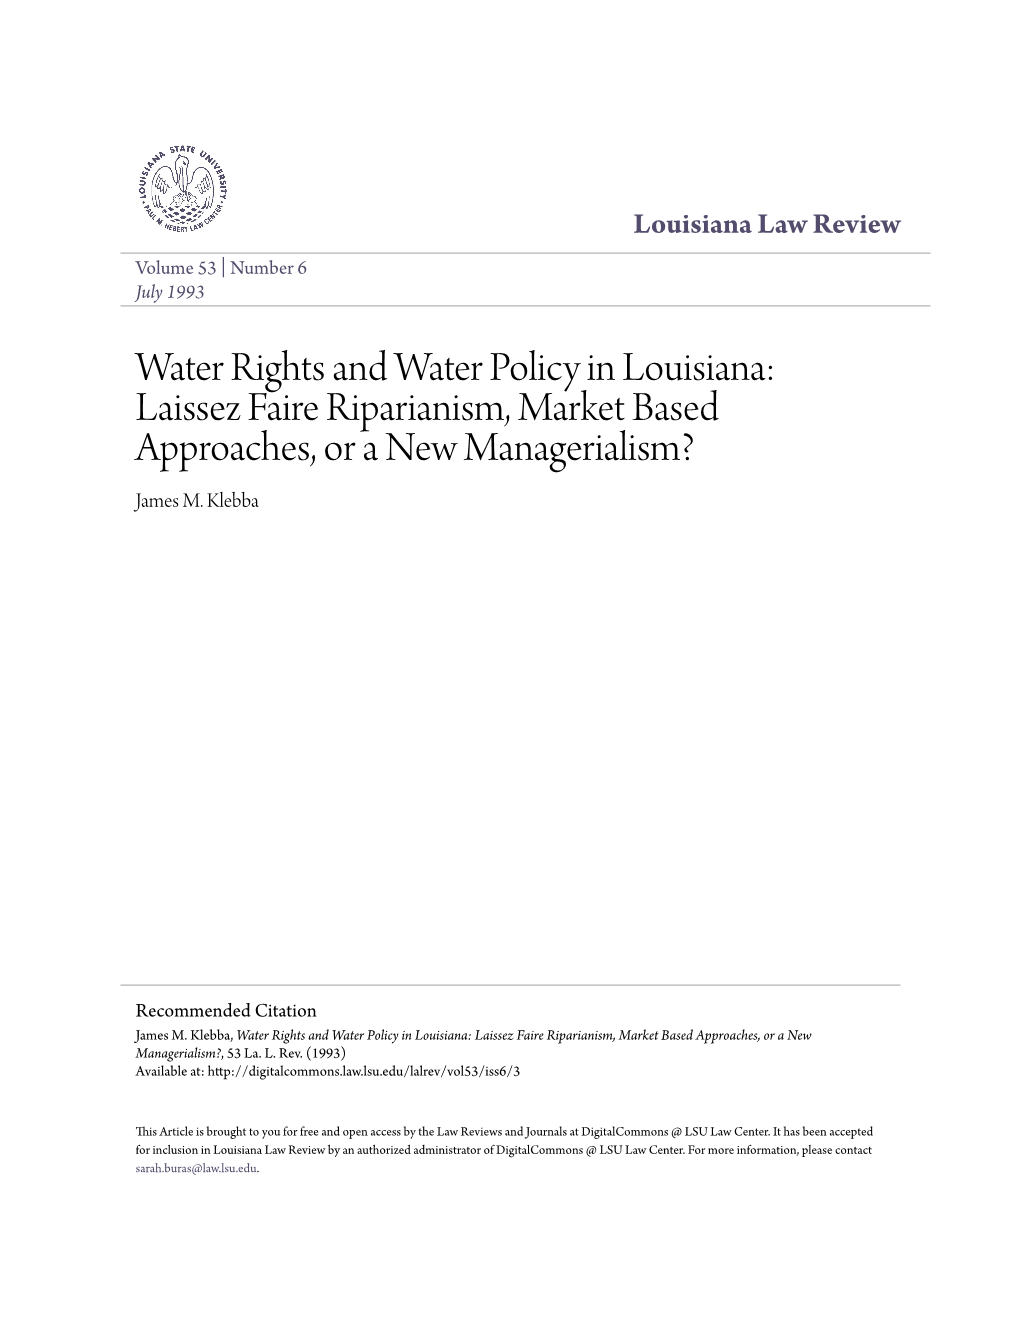 Water Rights and Water Policy in Louisiana: Laissez Faire Riparianism, Market Based Approaches, Or a New Managerialism? James M